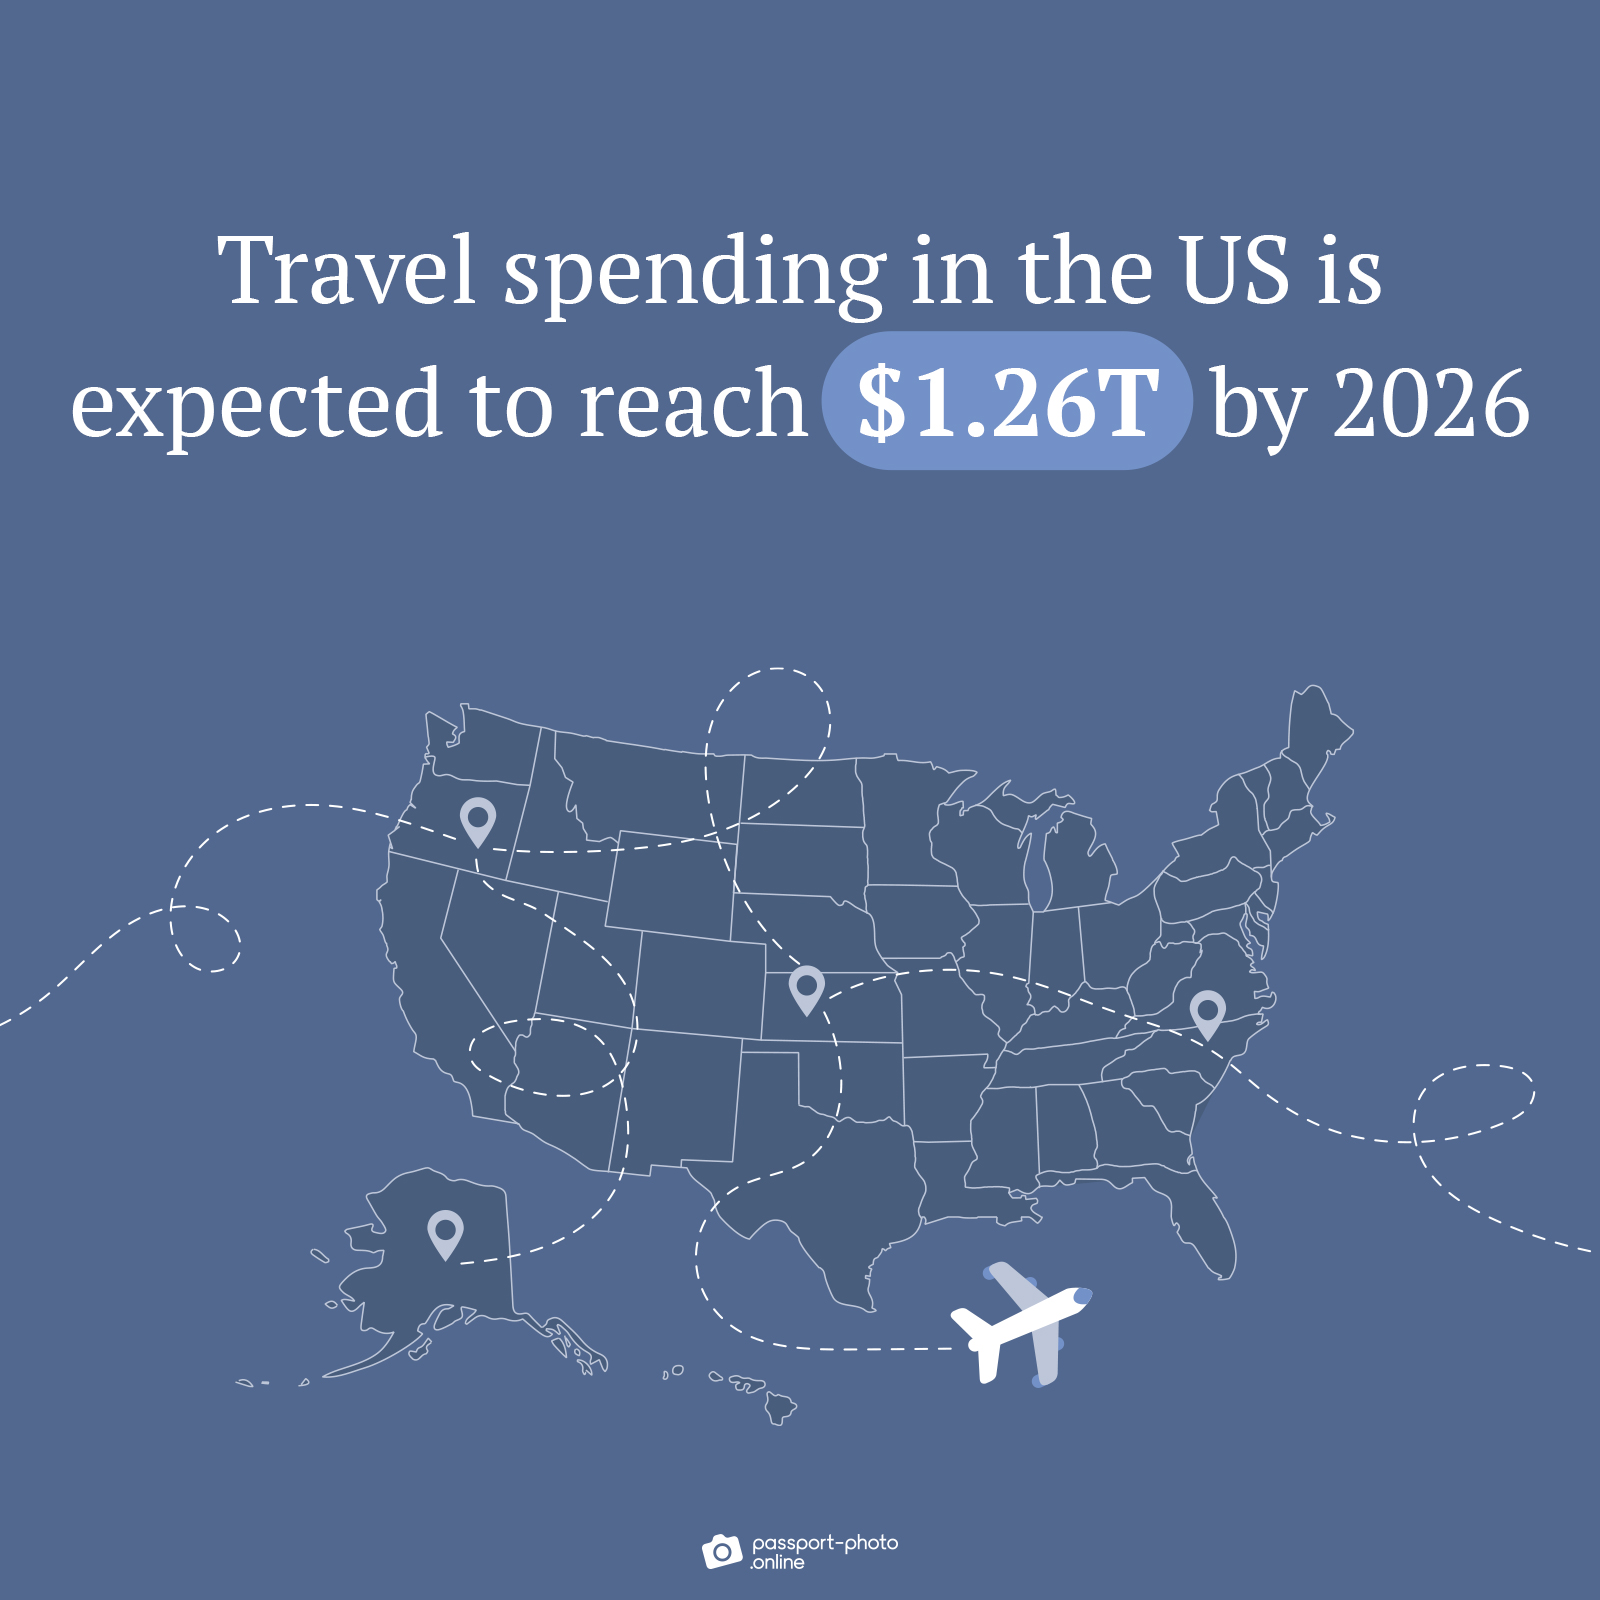 Travel spending in the US is expected to reach $1.26T by 2026